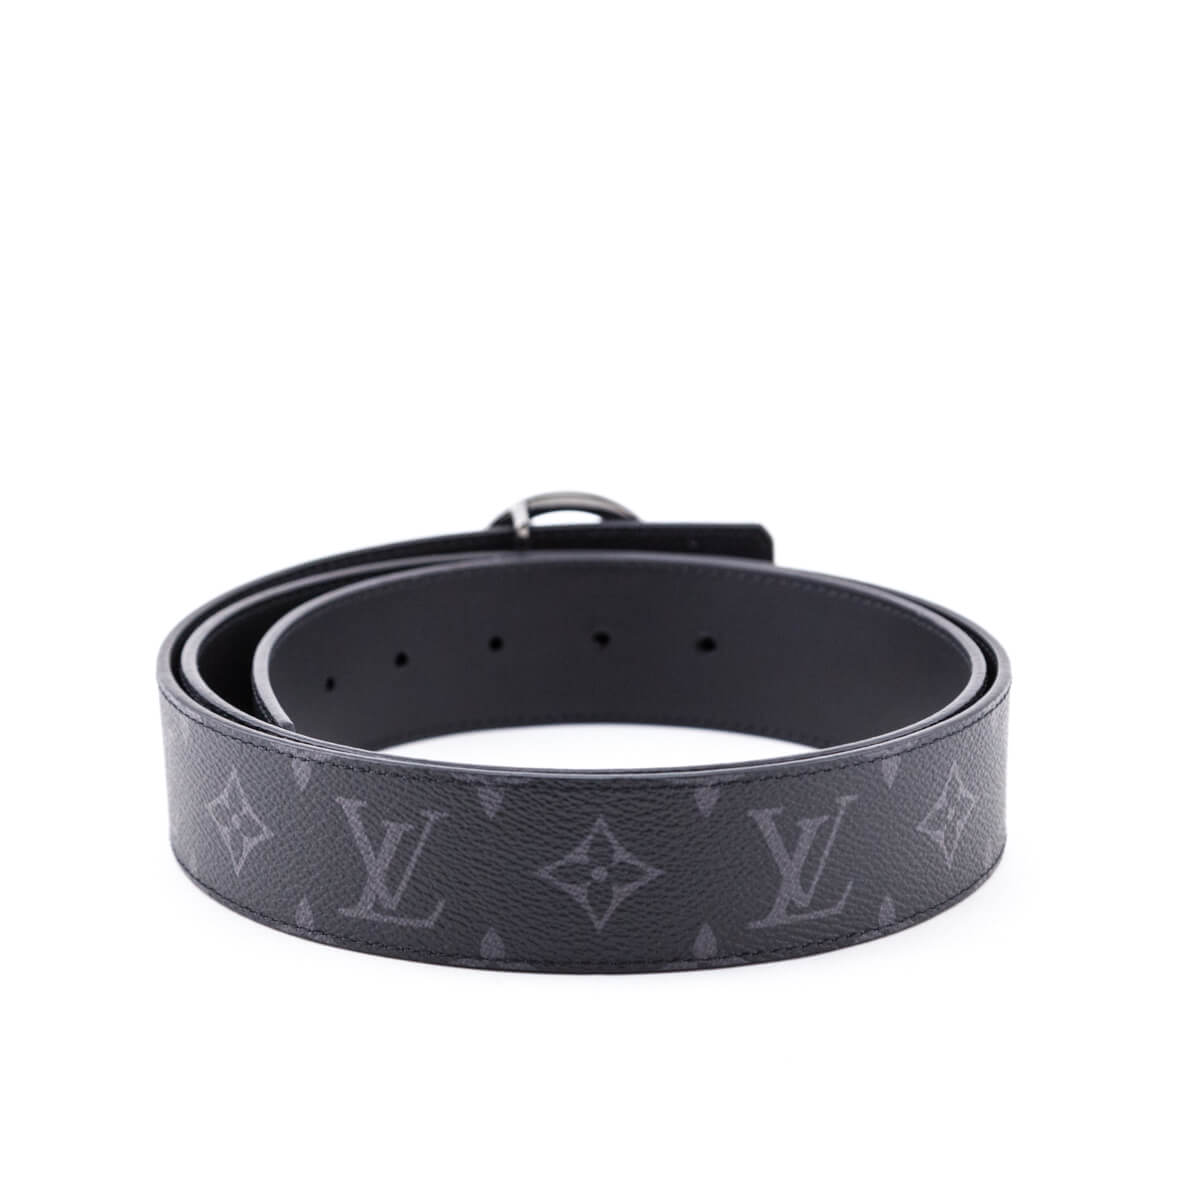 Lv circle leather belt Louis Vuitton Black size 95 cm in Leather - 35017598